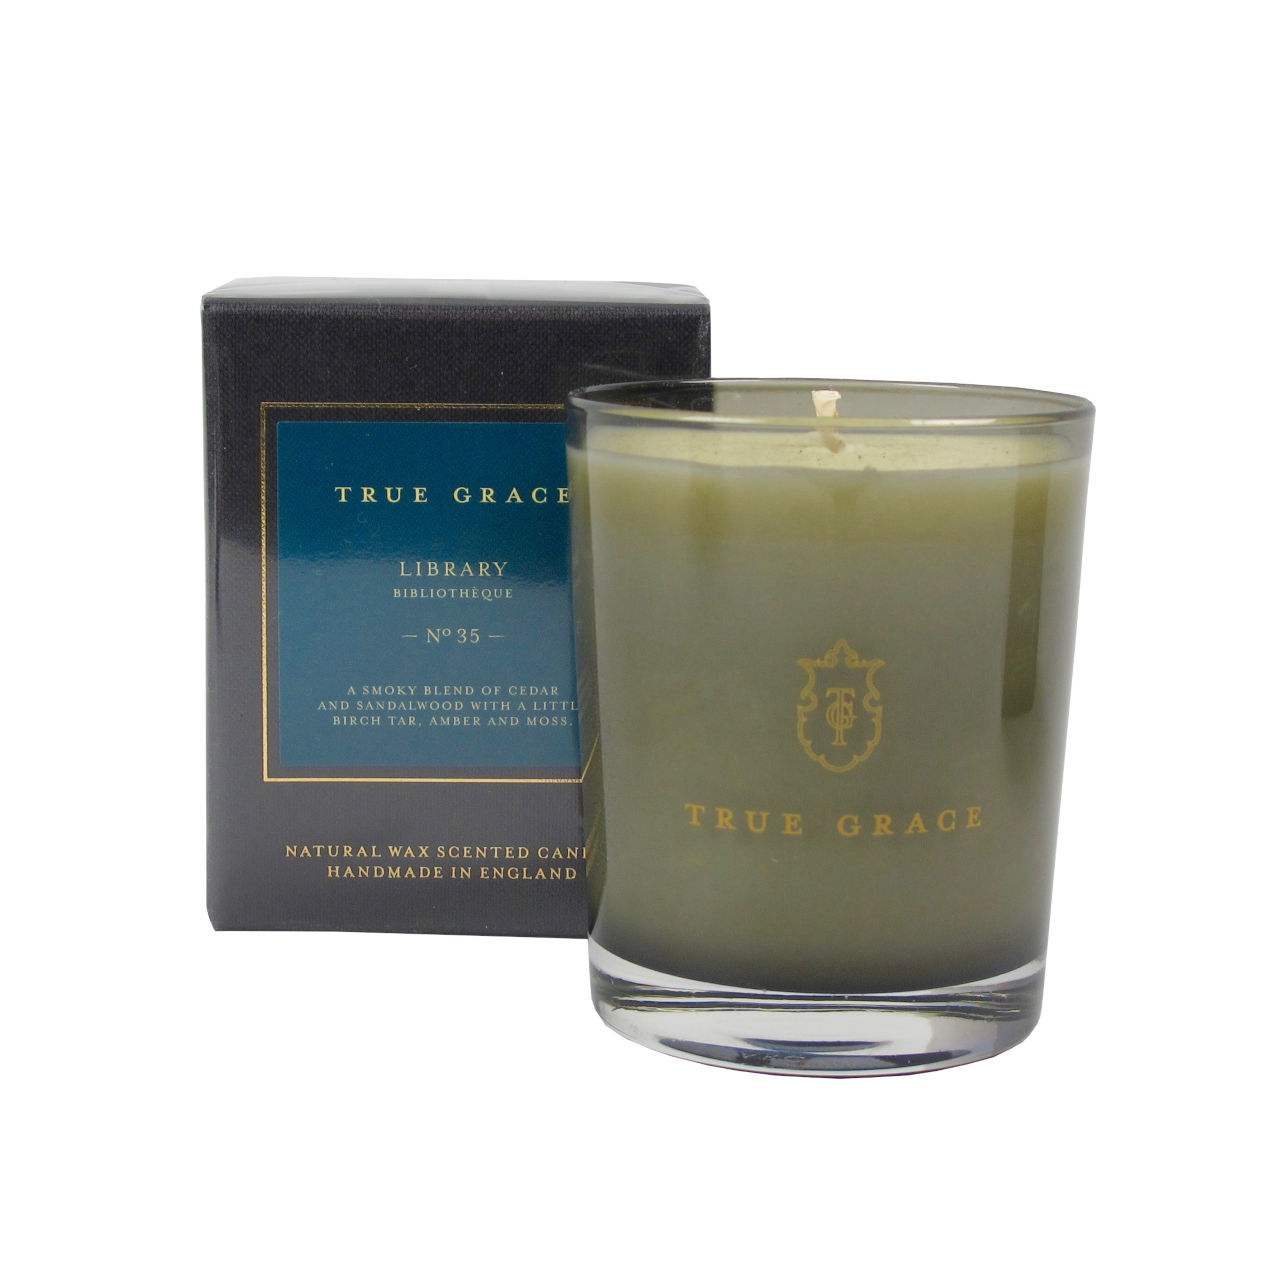 True Grace Scented Candle by True Grace - Library